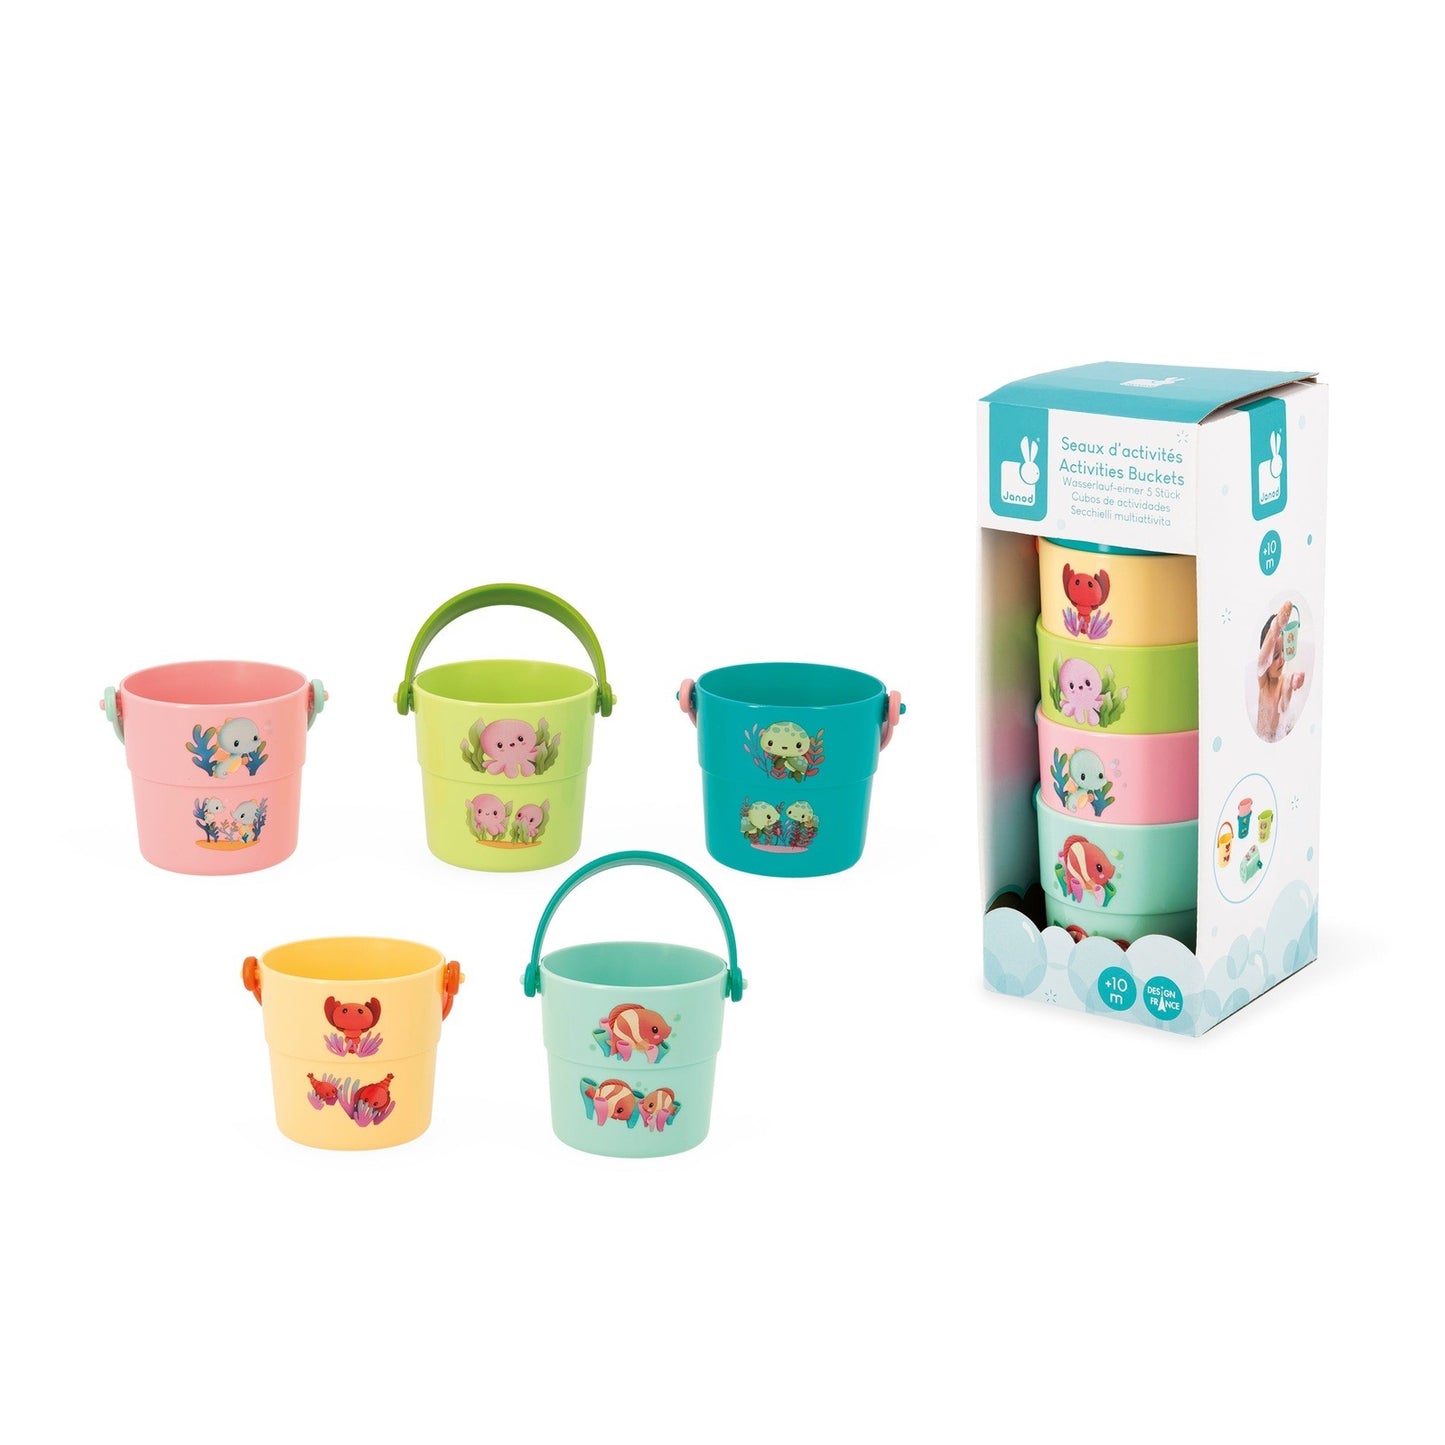 The Janod 5 Activity Bath Buckets Toy-My Baby Animals are stocked at Nottinghamshire children’s store Alf & Co